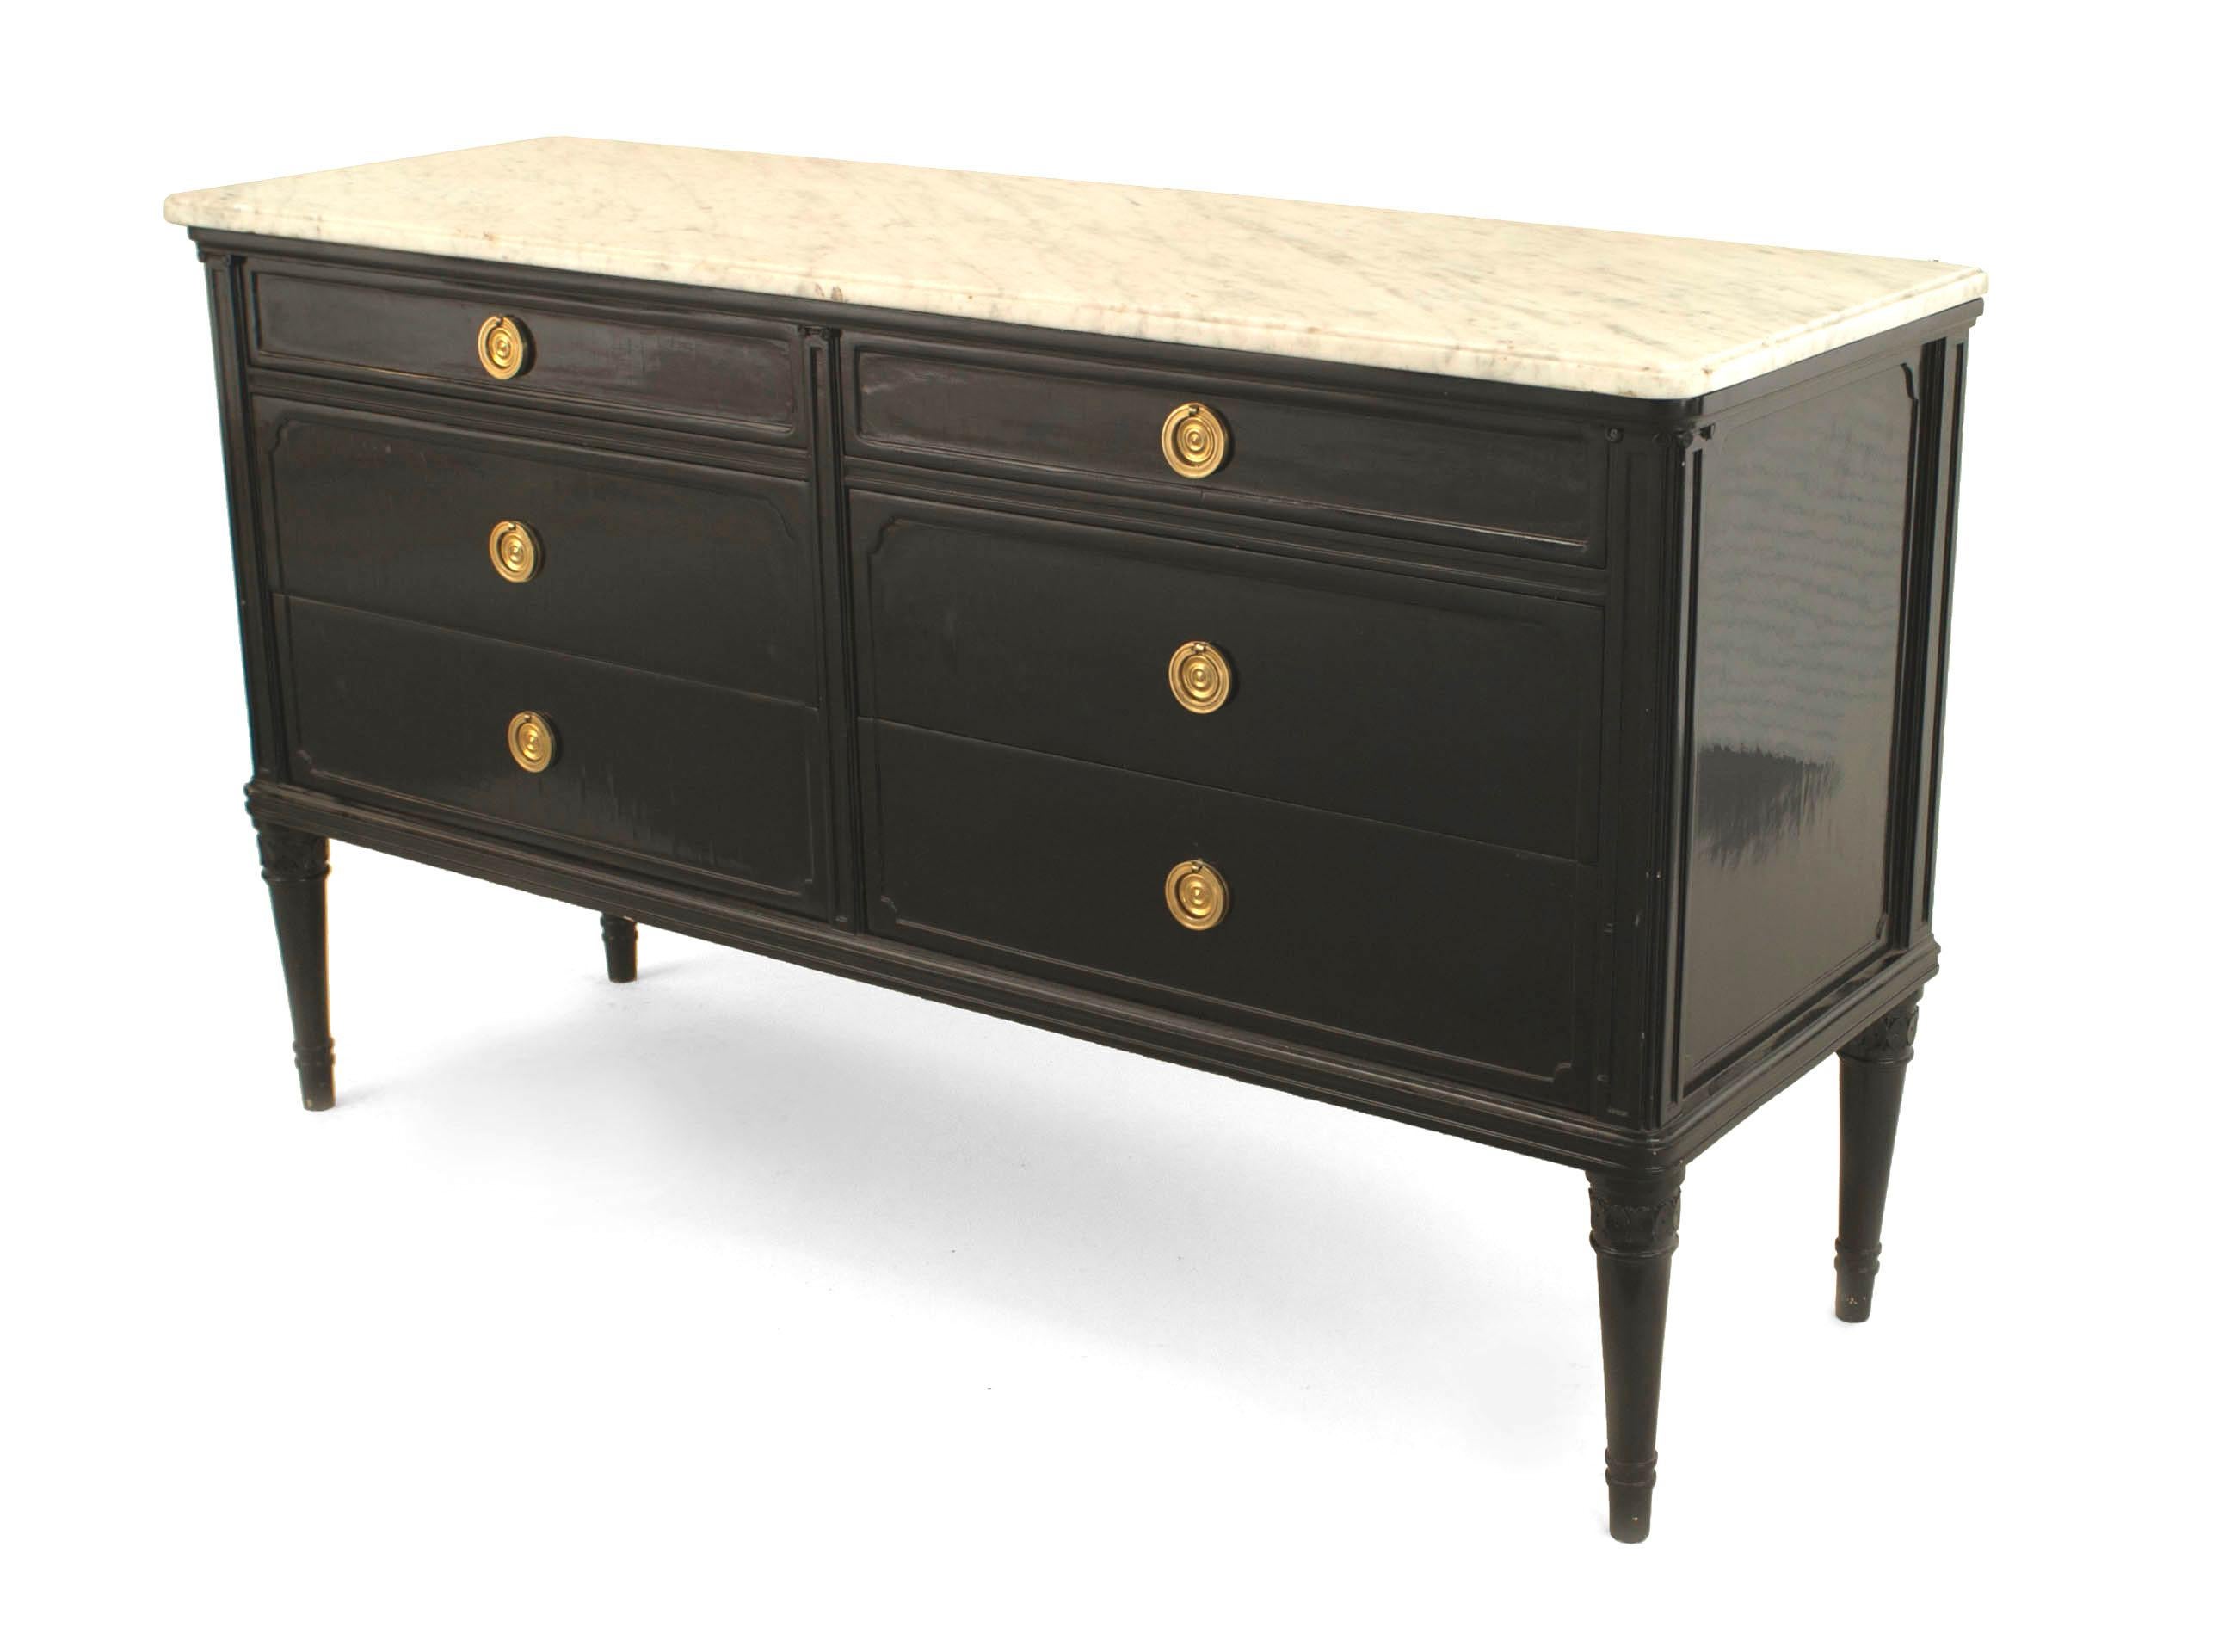 French Louis XVI style (1940s ) ebonized chest with 4 larger drawers over 2 smaller with bronze ring handles and a white marble top. (stamped: JANSEN)
